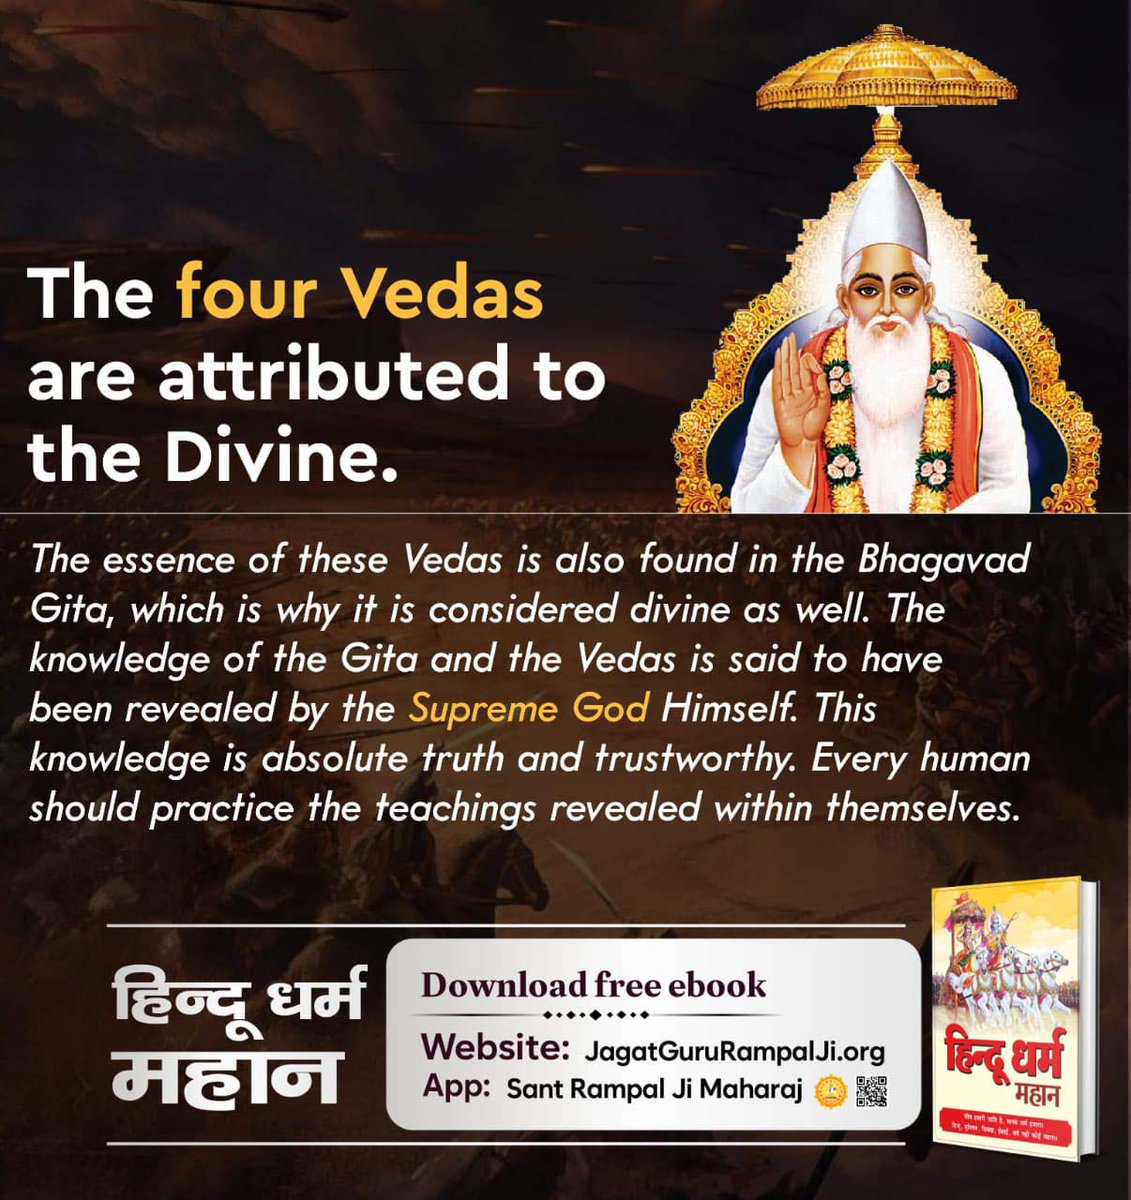 #आओ_जानें_सनातन_को
The four Vedas are attributed to the divine.
Sant Rampal Ji Maharaj